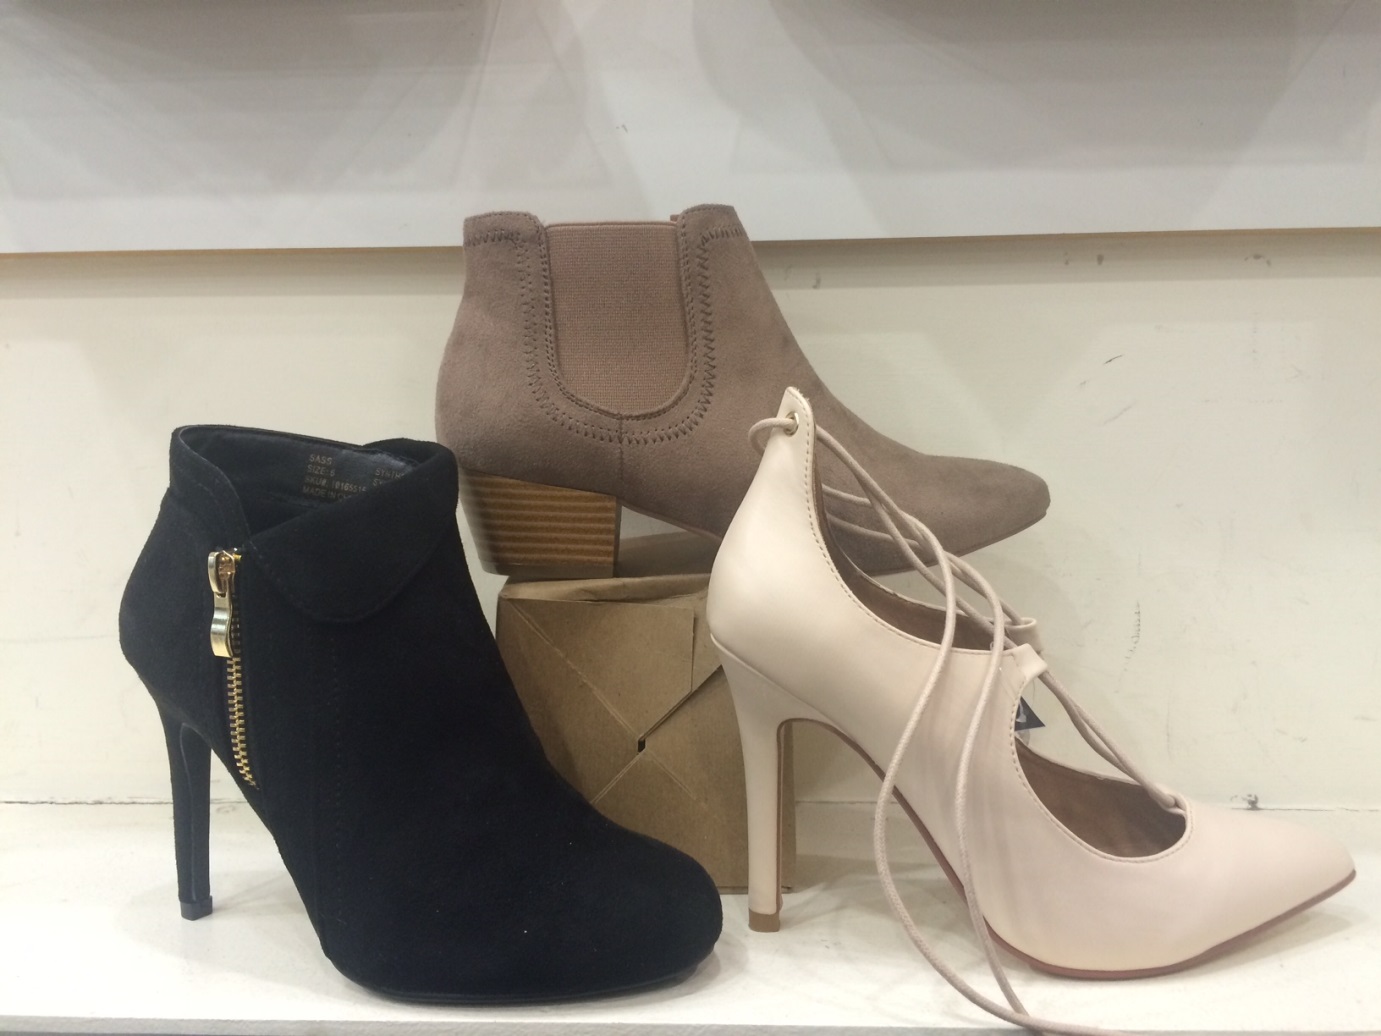 payless shoes highpoint